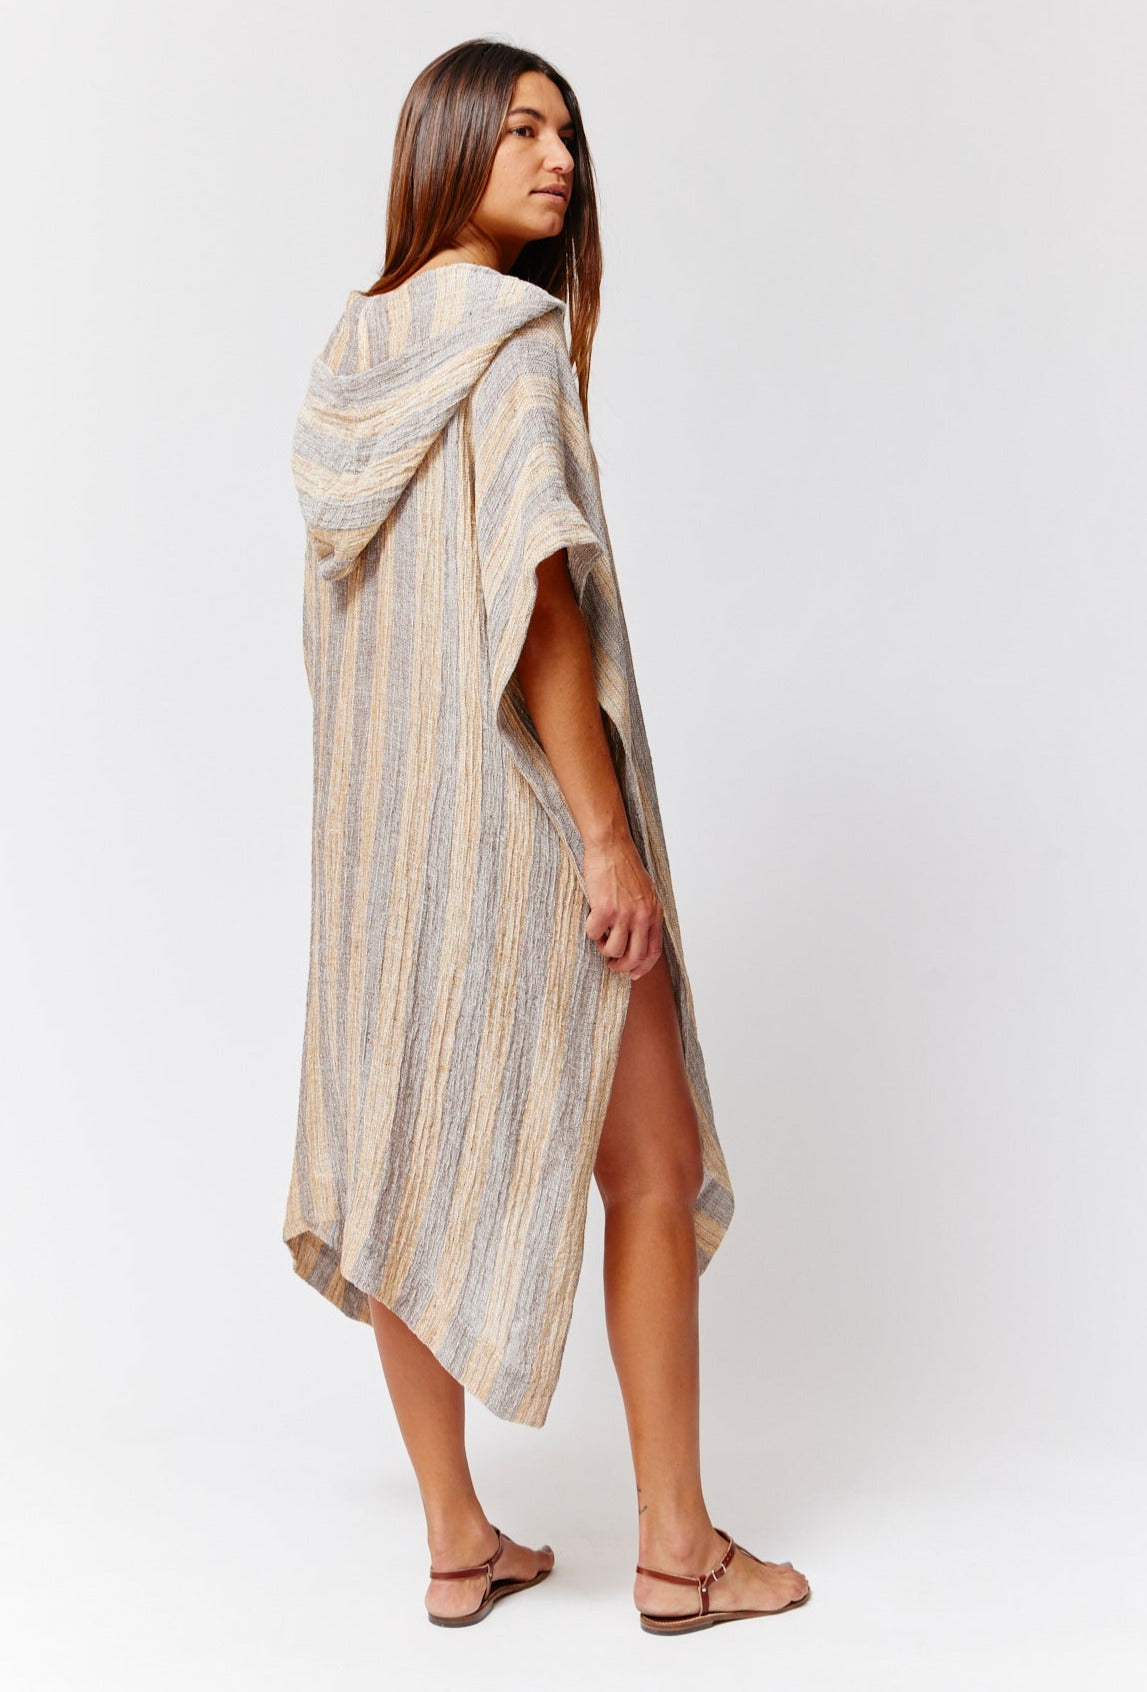 THE BEACH PONCHO in SIENA & NATURAL STRIPED CHIOS GAUZE